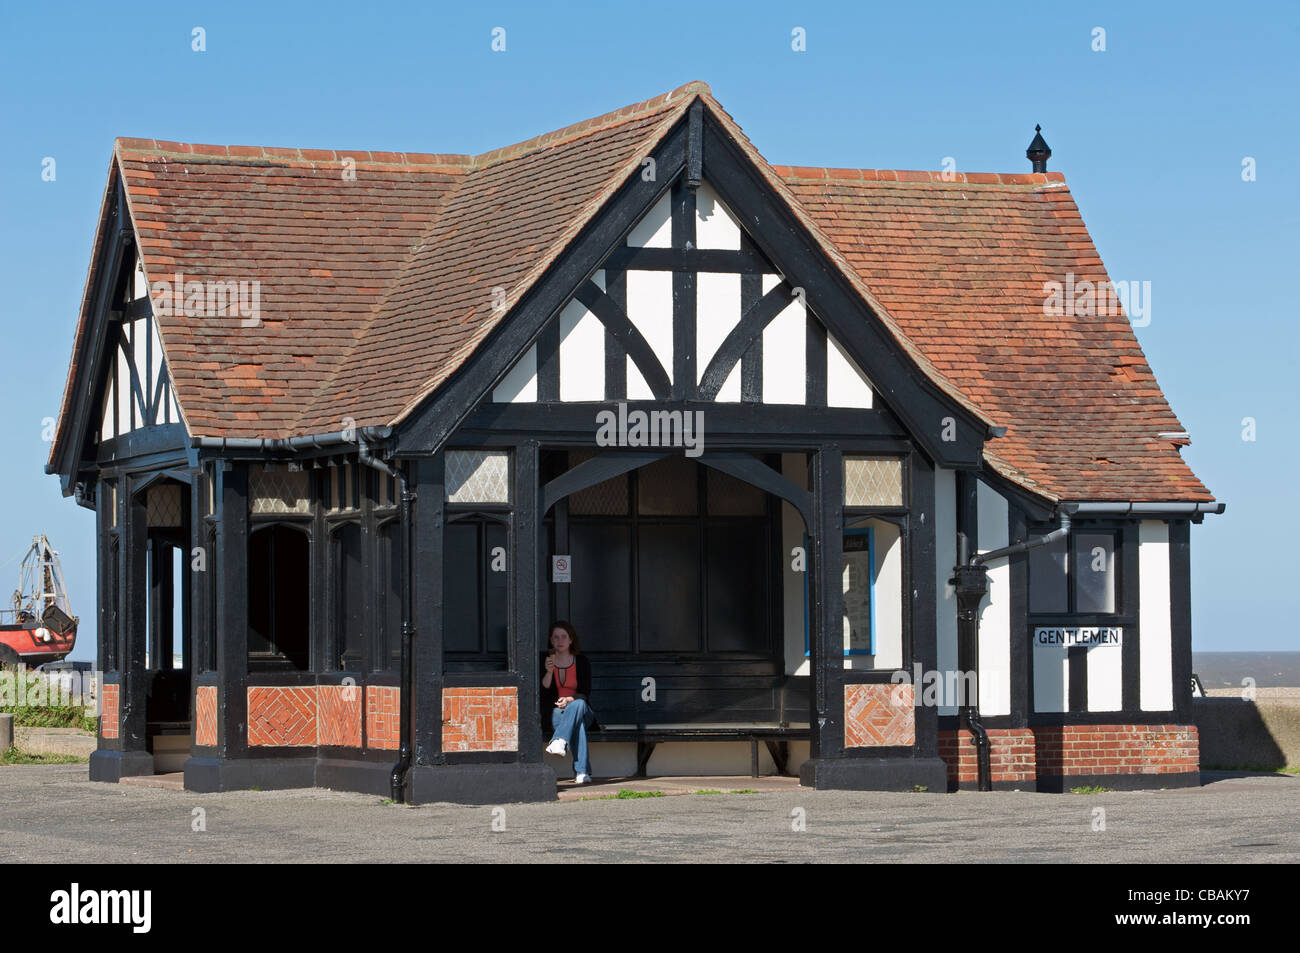 Wood-framed shelter with public toilets, Aldeburgh, Suffolk, UK. Stock Photo